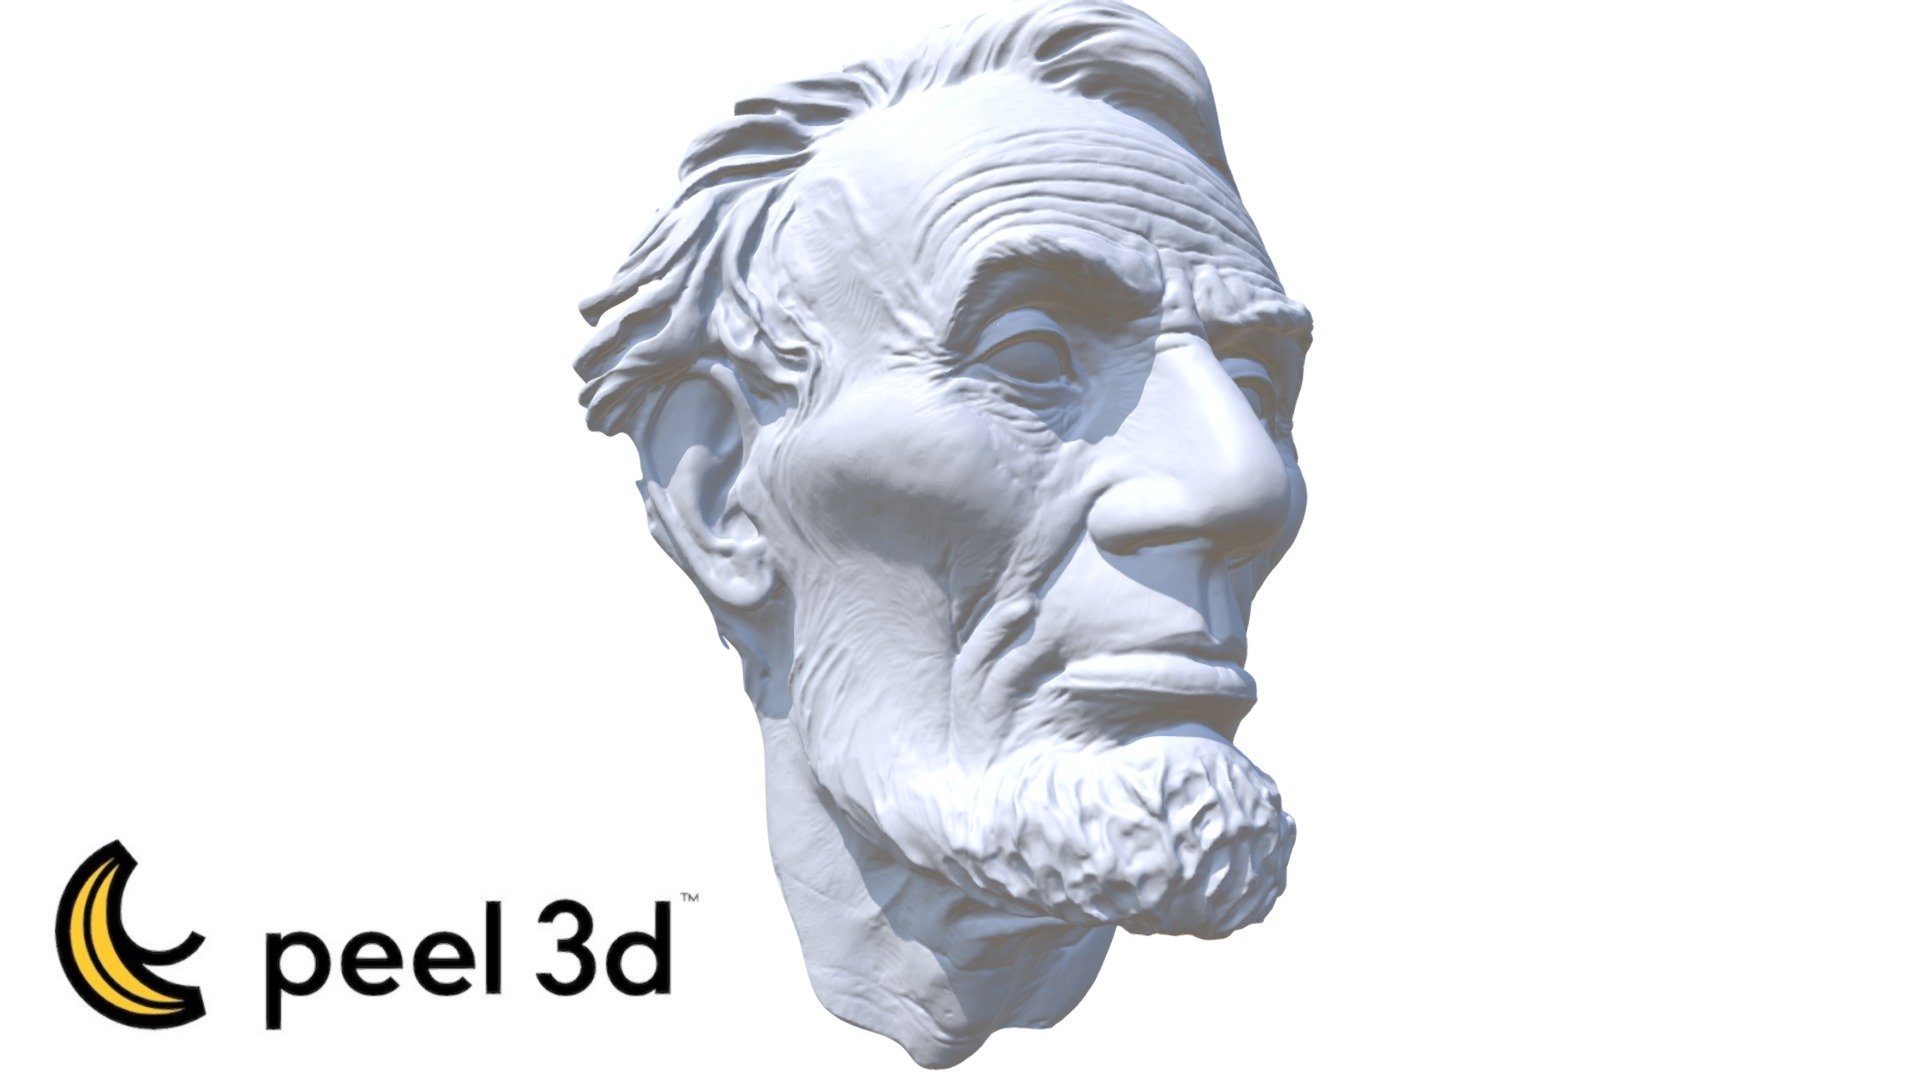 Lincoln face scanned with peel 3d